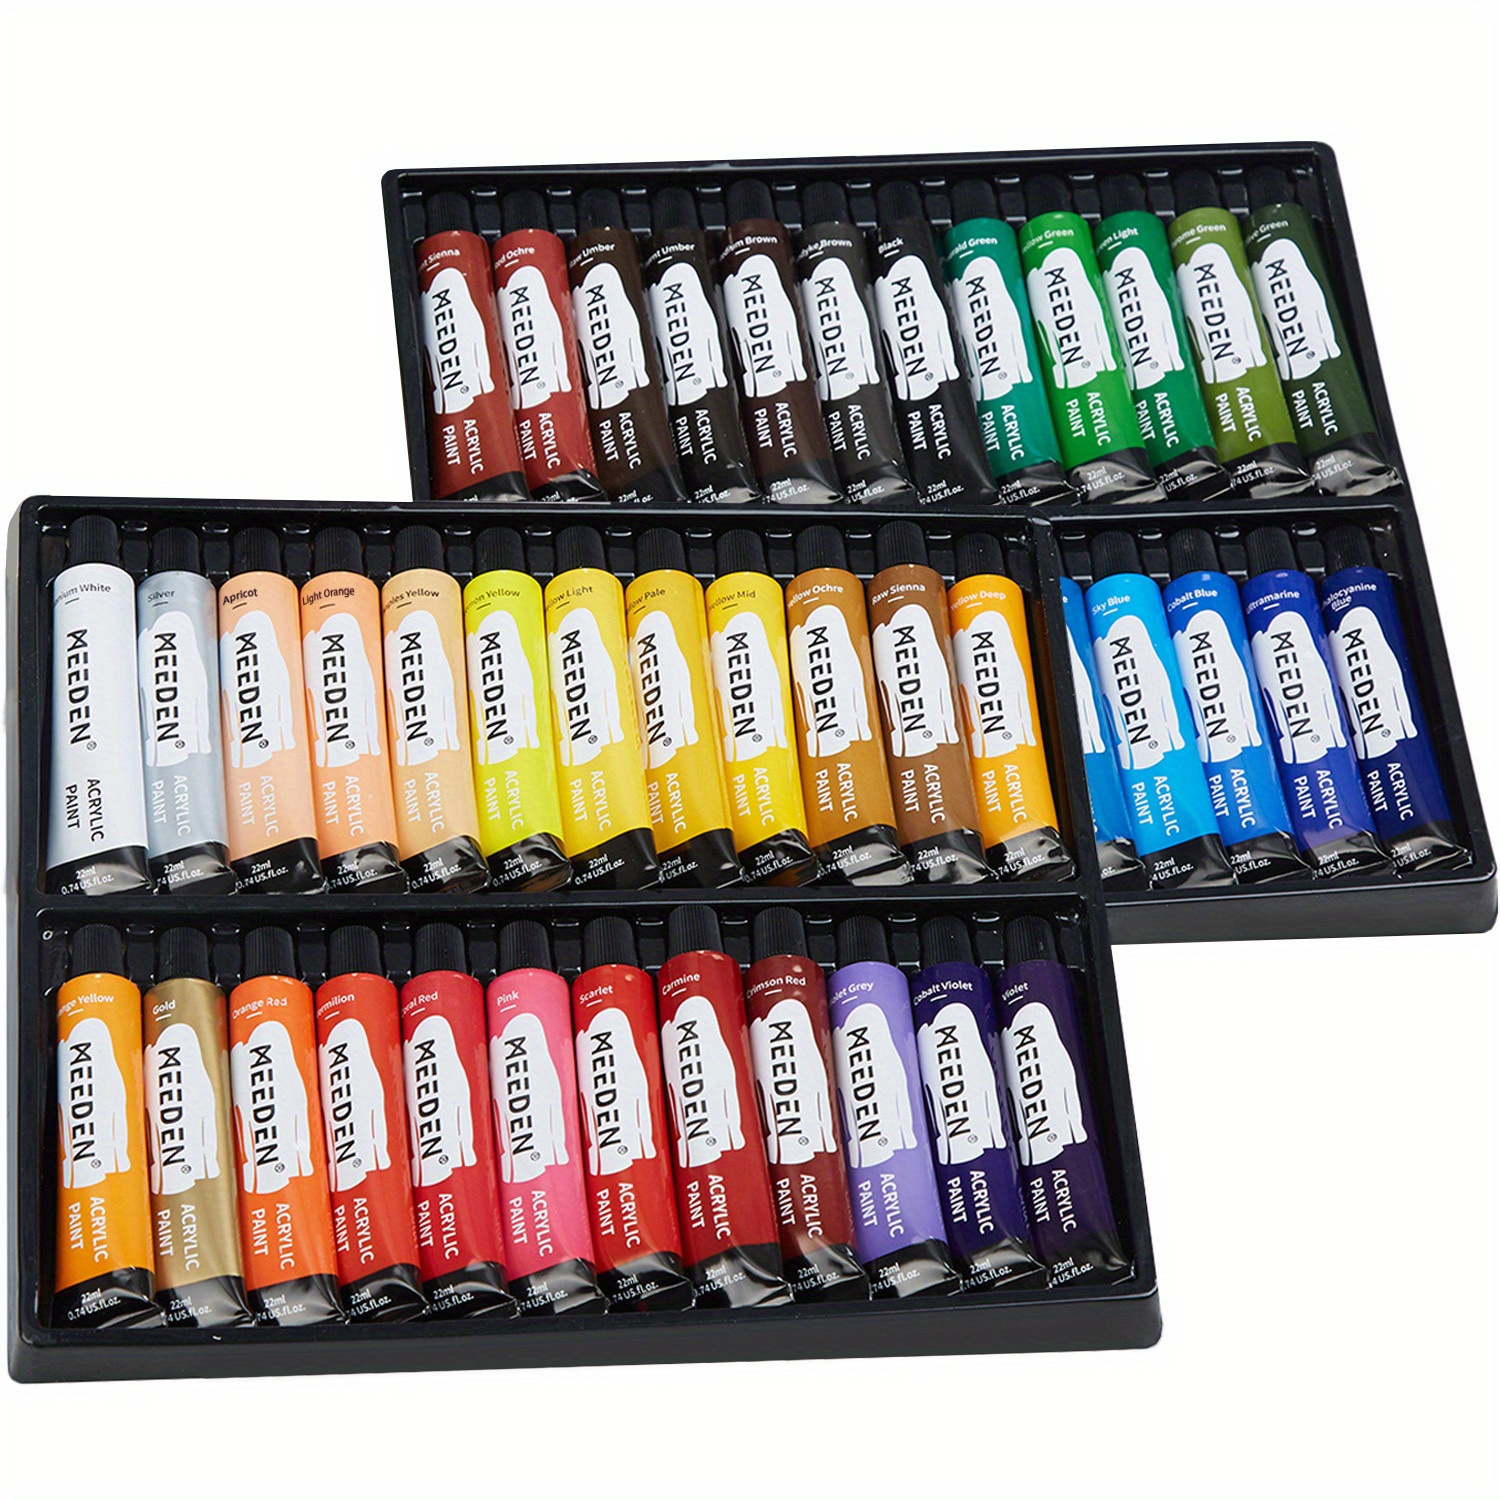 MEEDEN Acrylic Paint Set of 48 Colors/Tubes (22ml/0.74 oz.) Non Toxic Rich  Pigments Colors Great for Artist Student, Hobby